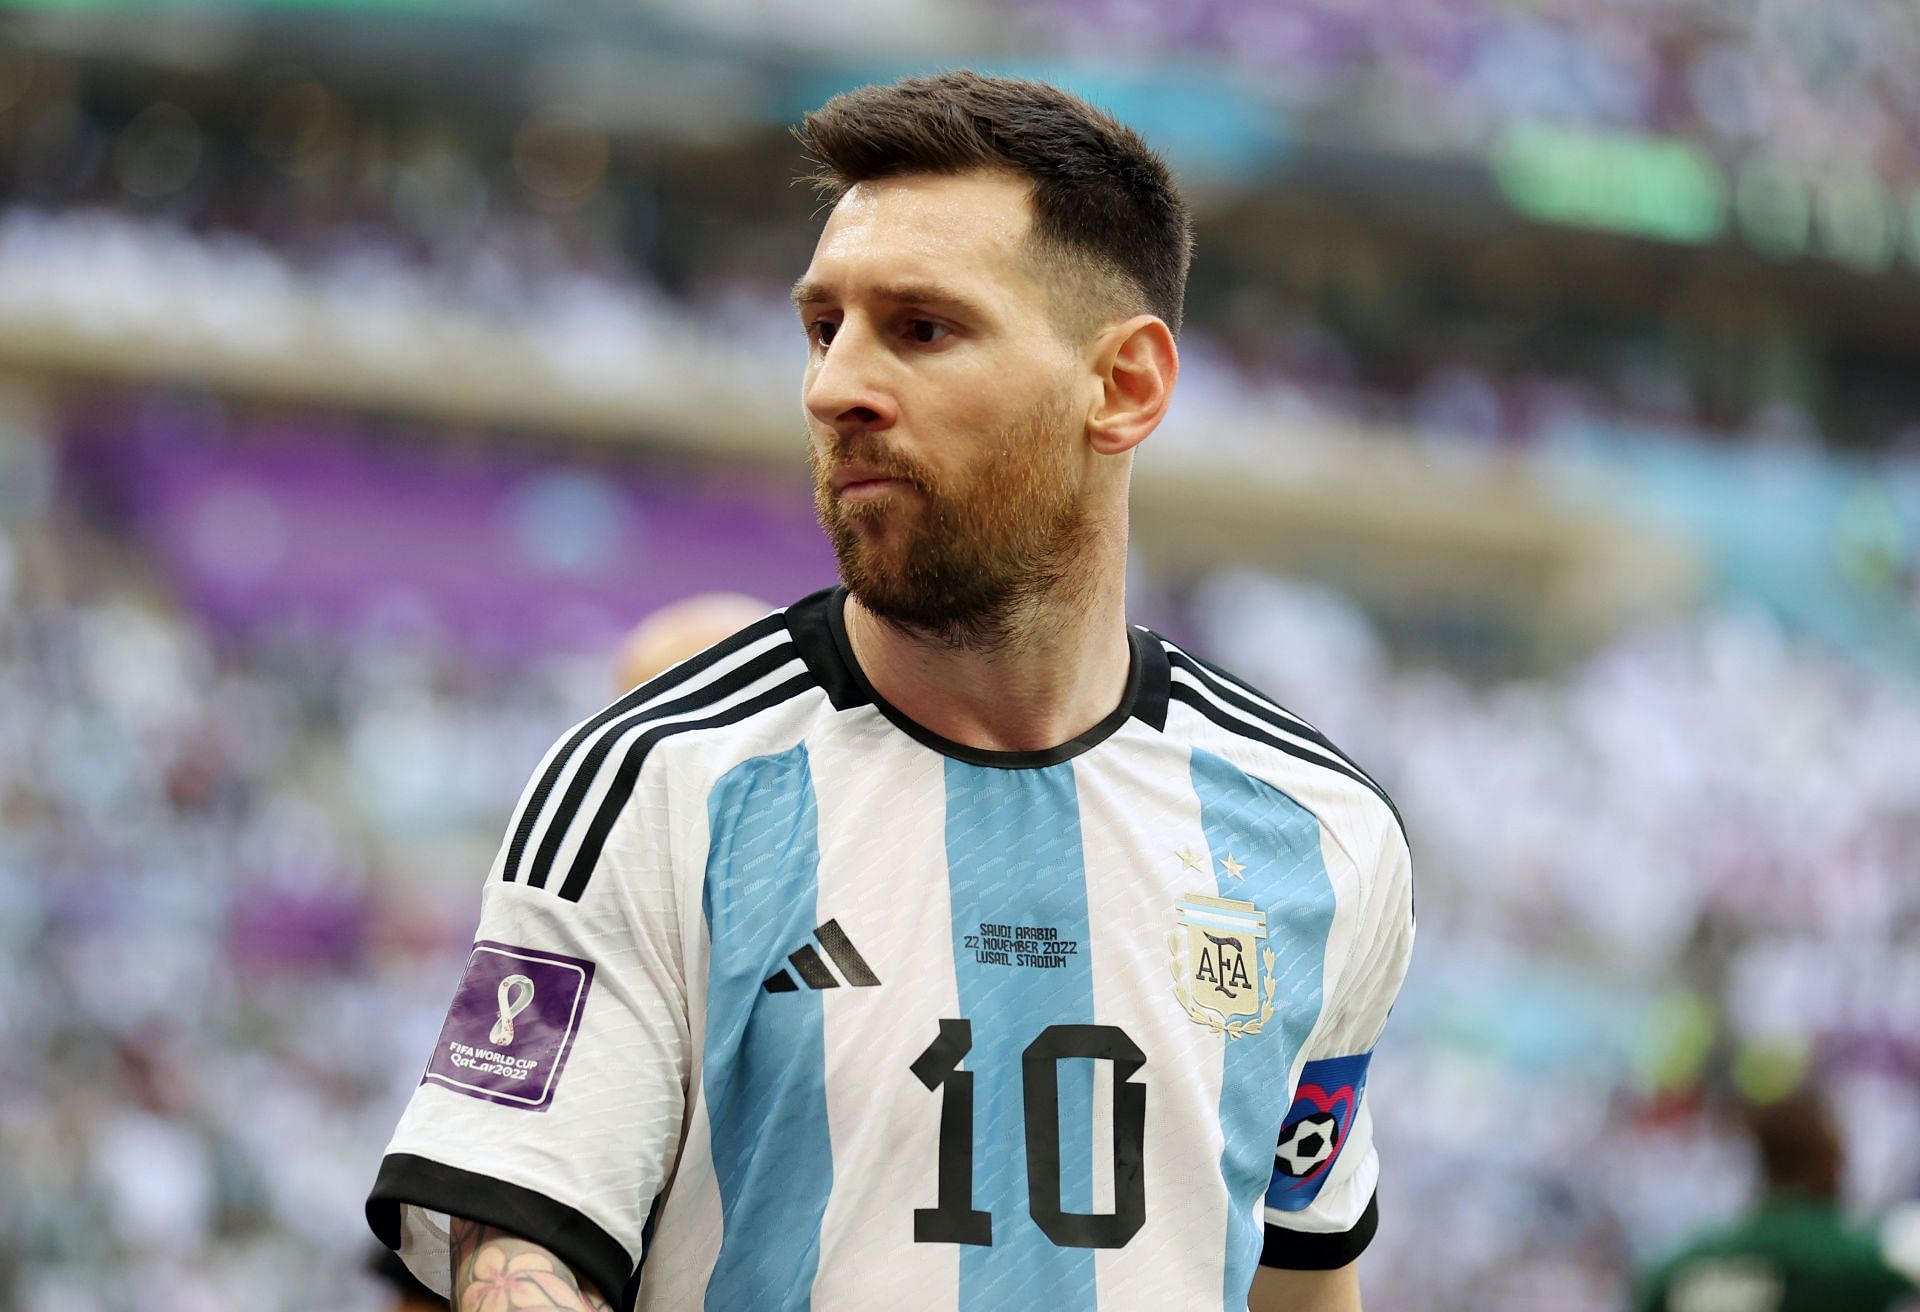 Lionel Messi endured an inauspicious start to the 2022 FIFA World Cup.